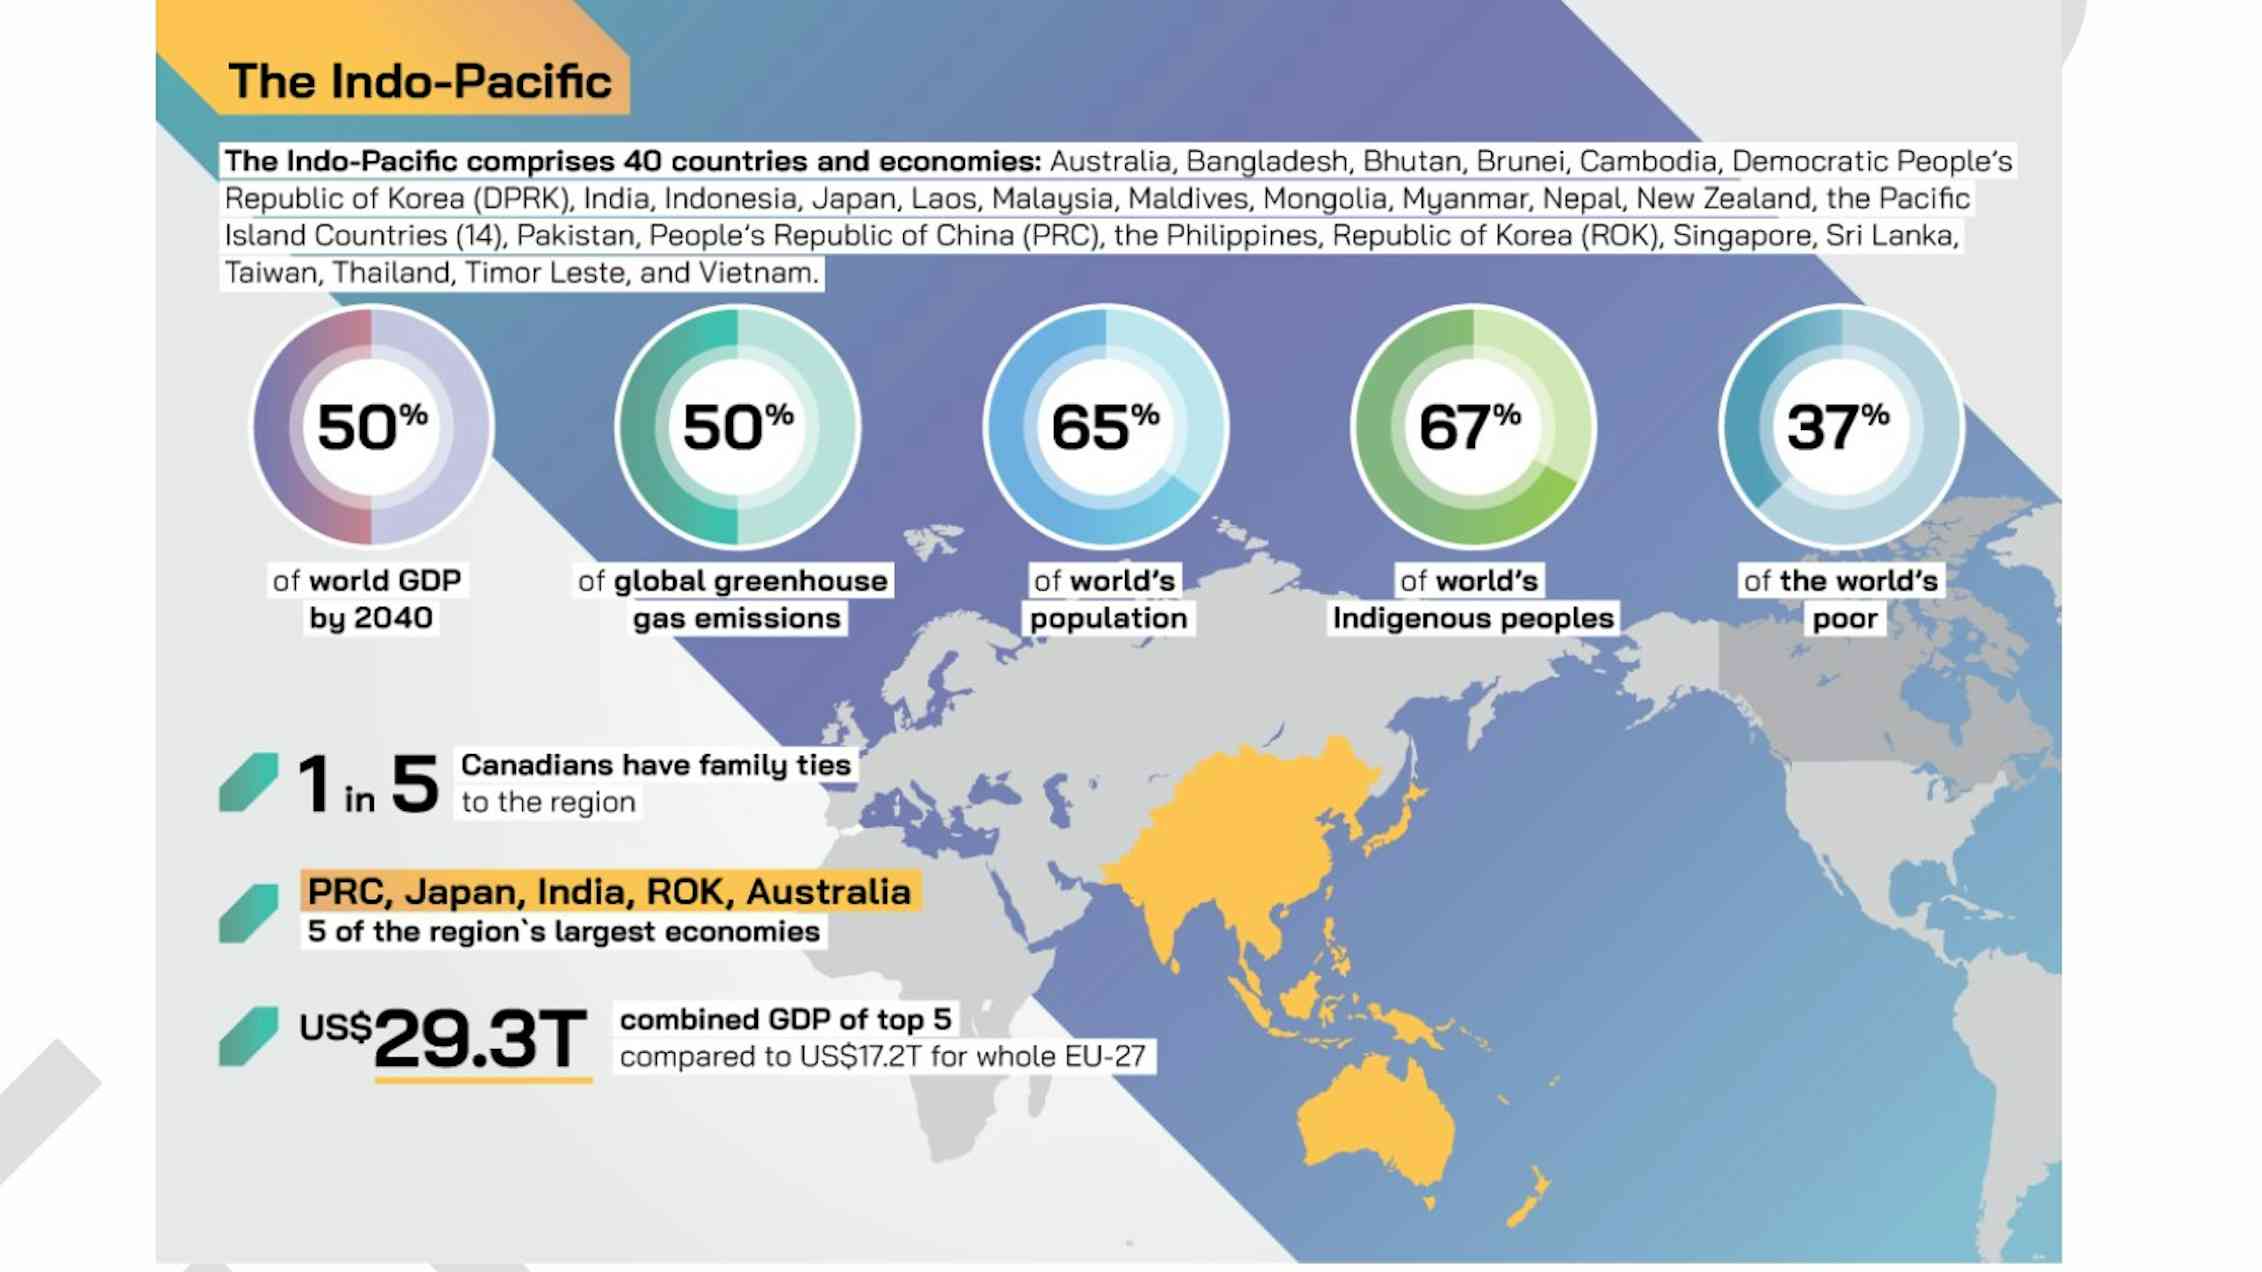 An image shows facts and figures about the Indo-Pacific region.